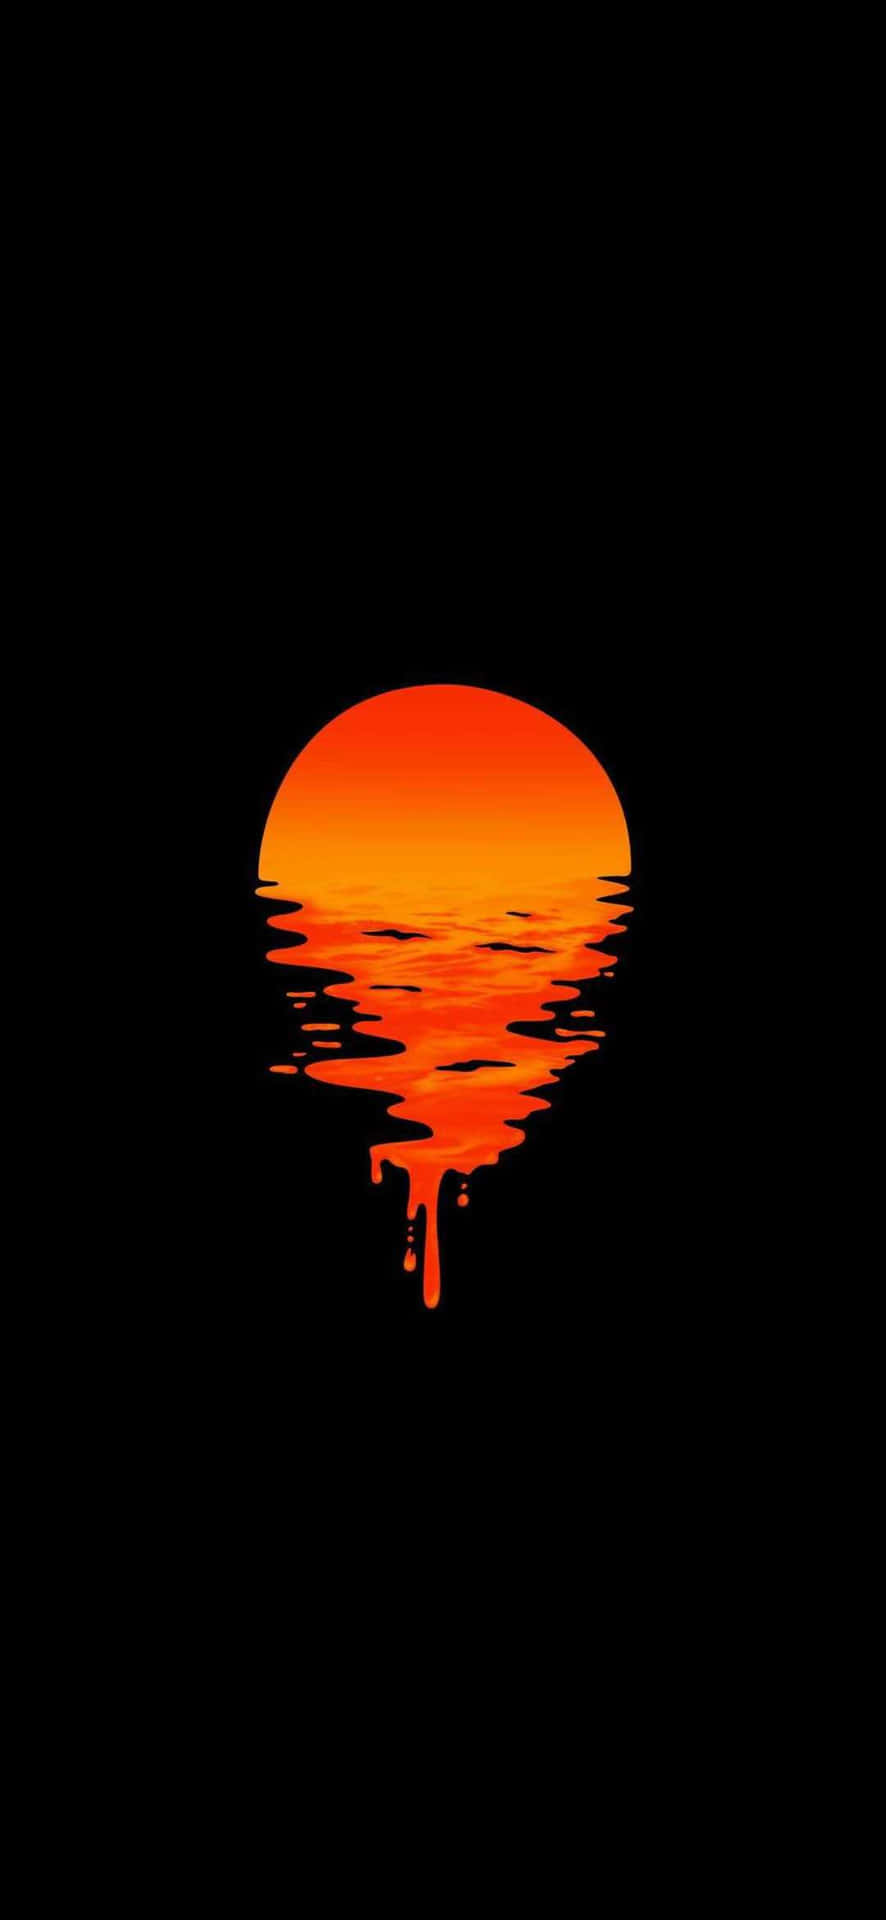 A Sunset With A Black Background Background